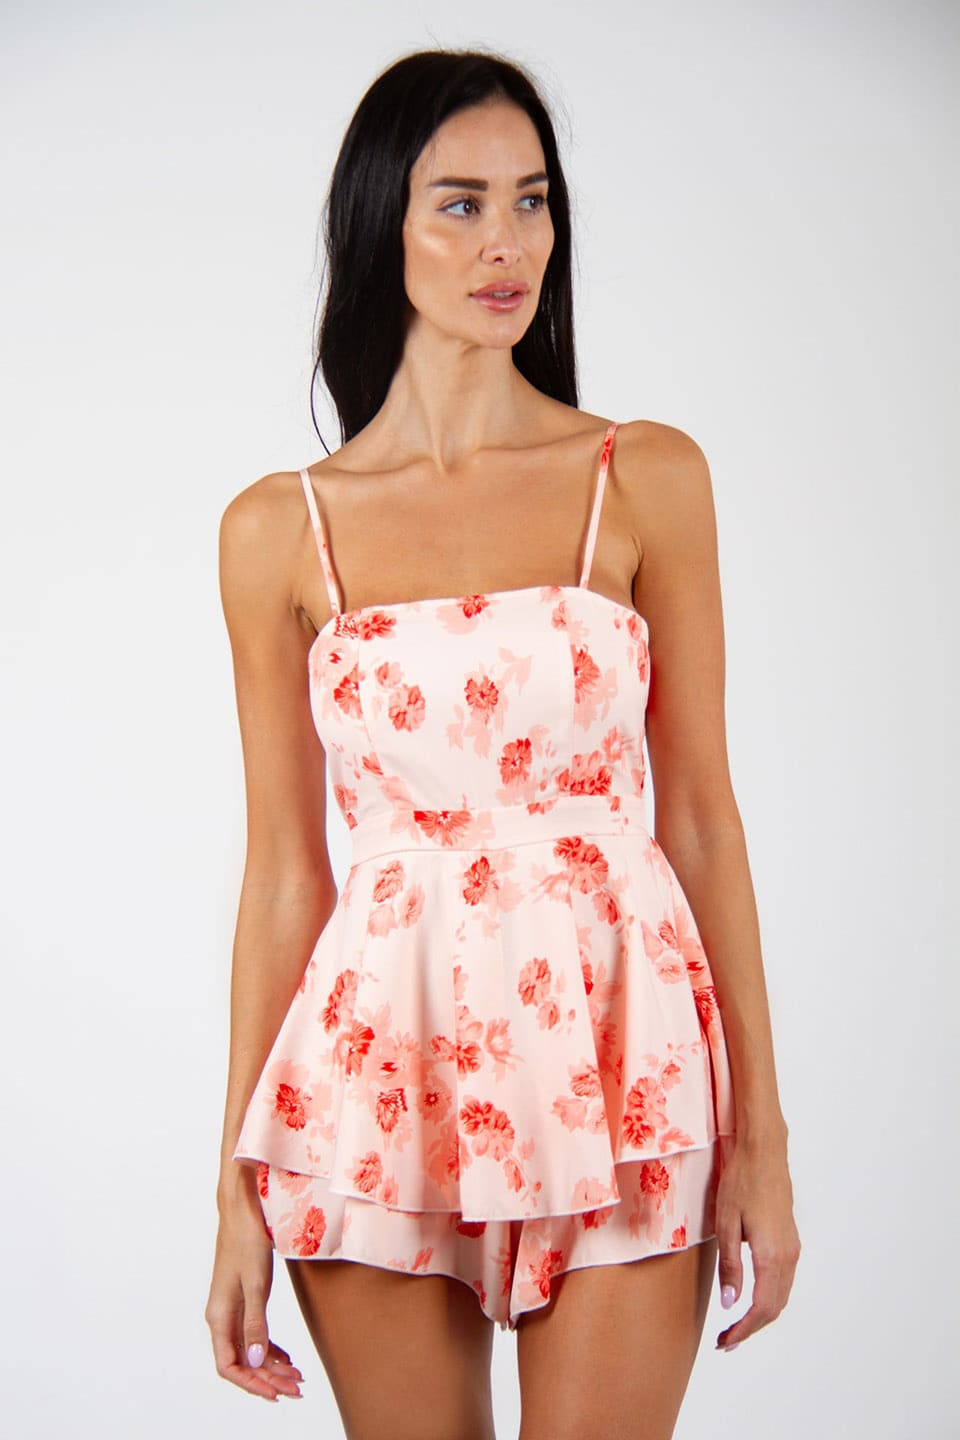 New floral print playsuit, in white and red colors. Model posing for front view